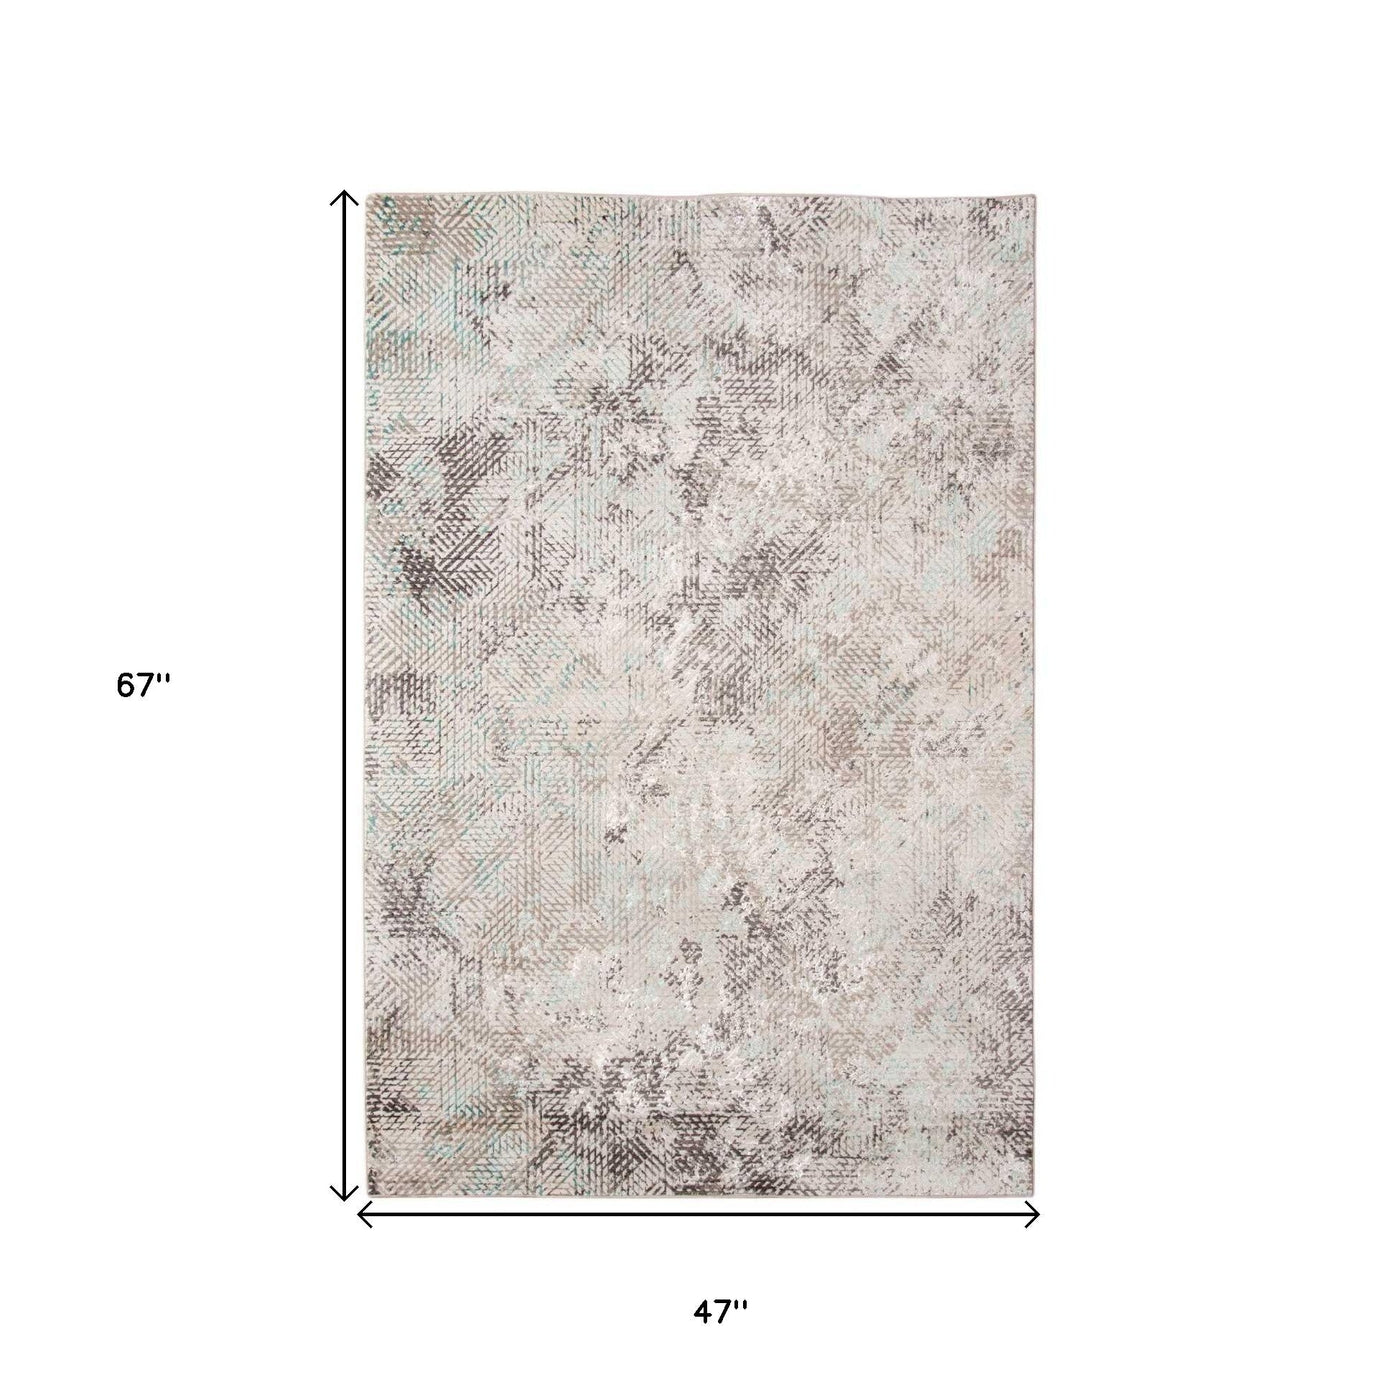 4’ X 6’ Gray Abstract Area Rug - 4’ x 6’ - Area Rugs